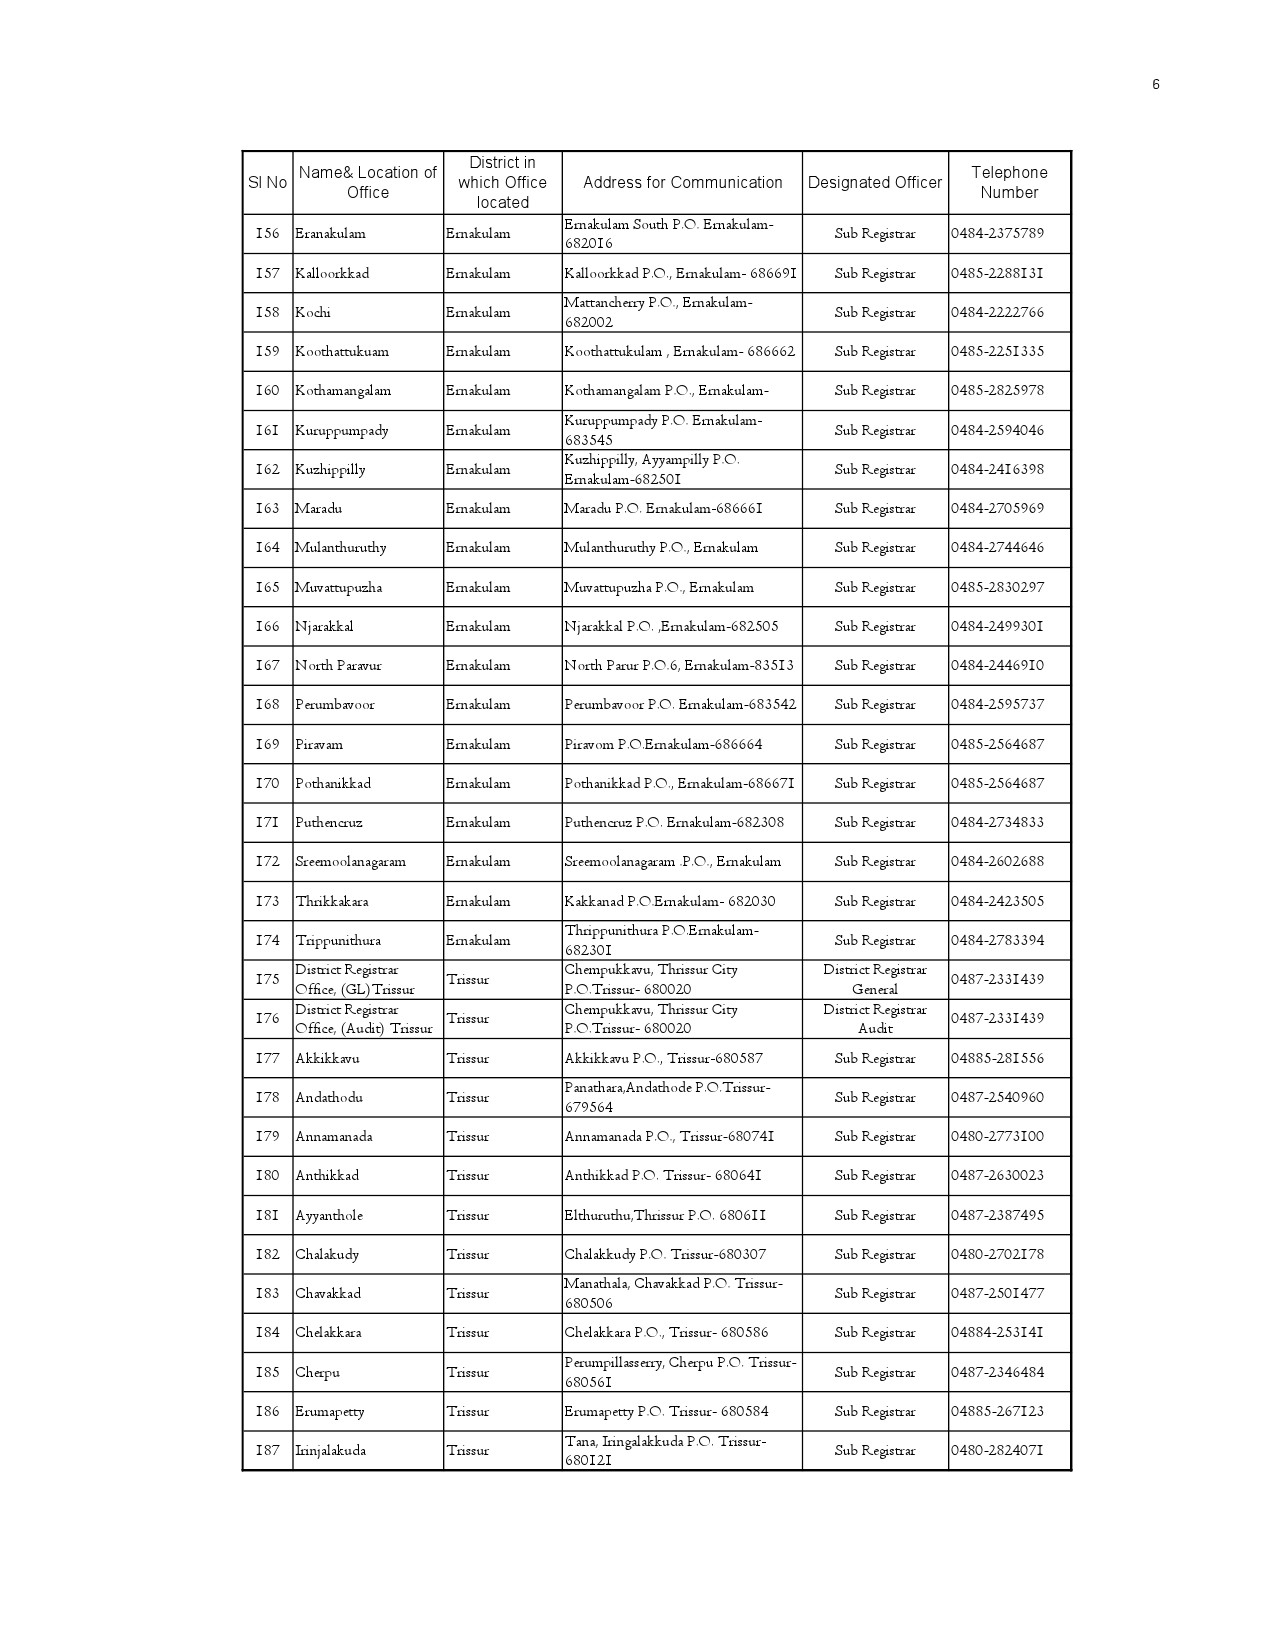 List of Offices in Kerala under the Department of Registration - Notification Image 6